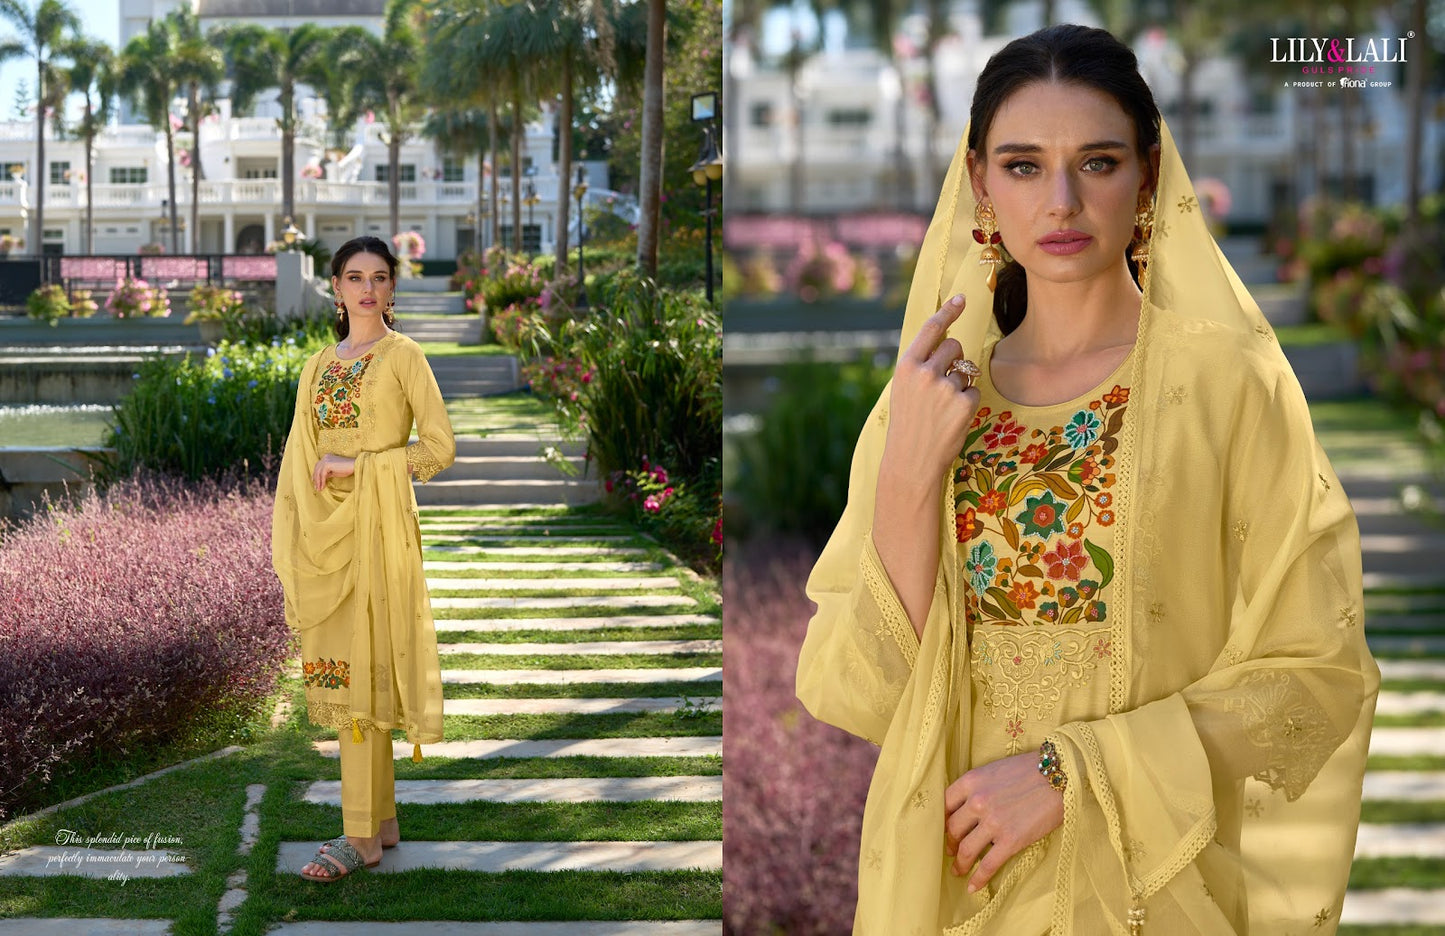 Safina Lily Lali Chanderi Silk Readymade Pant Style Suits